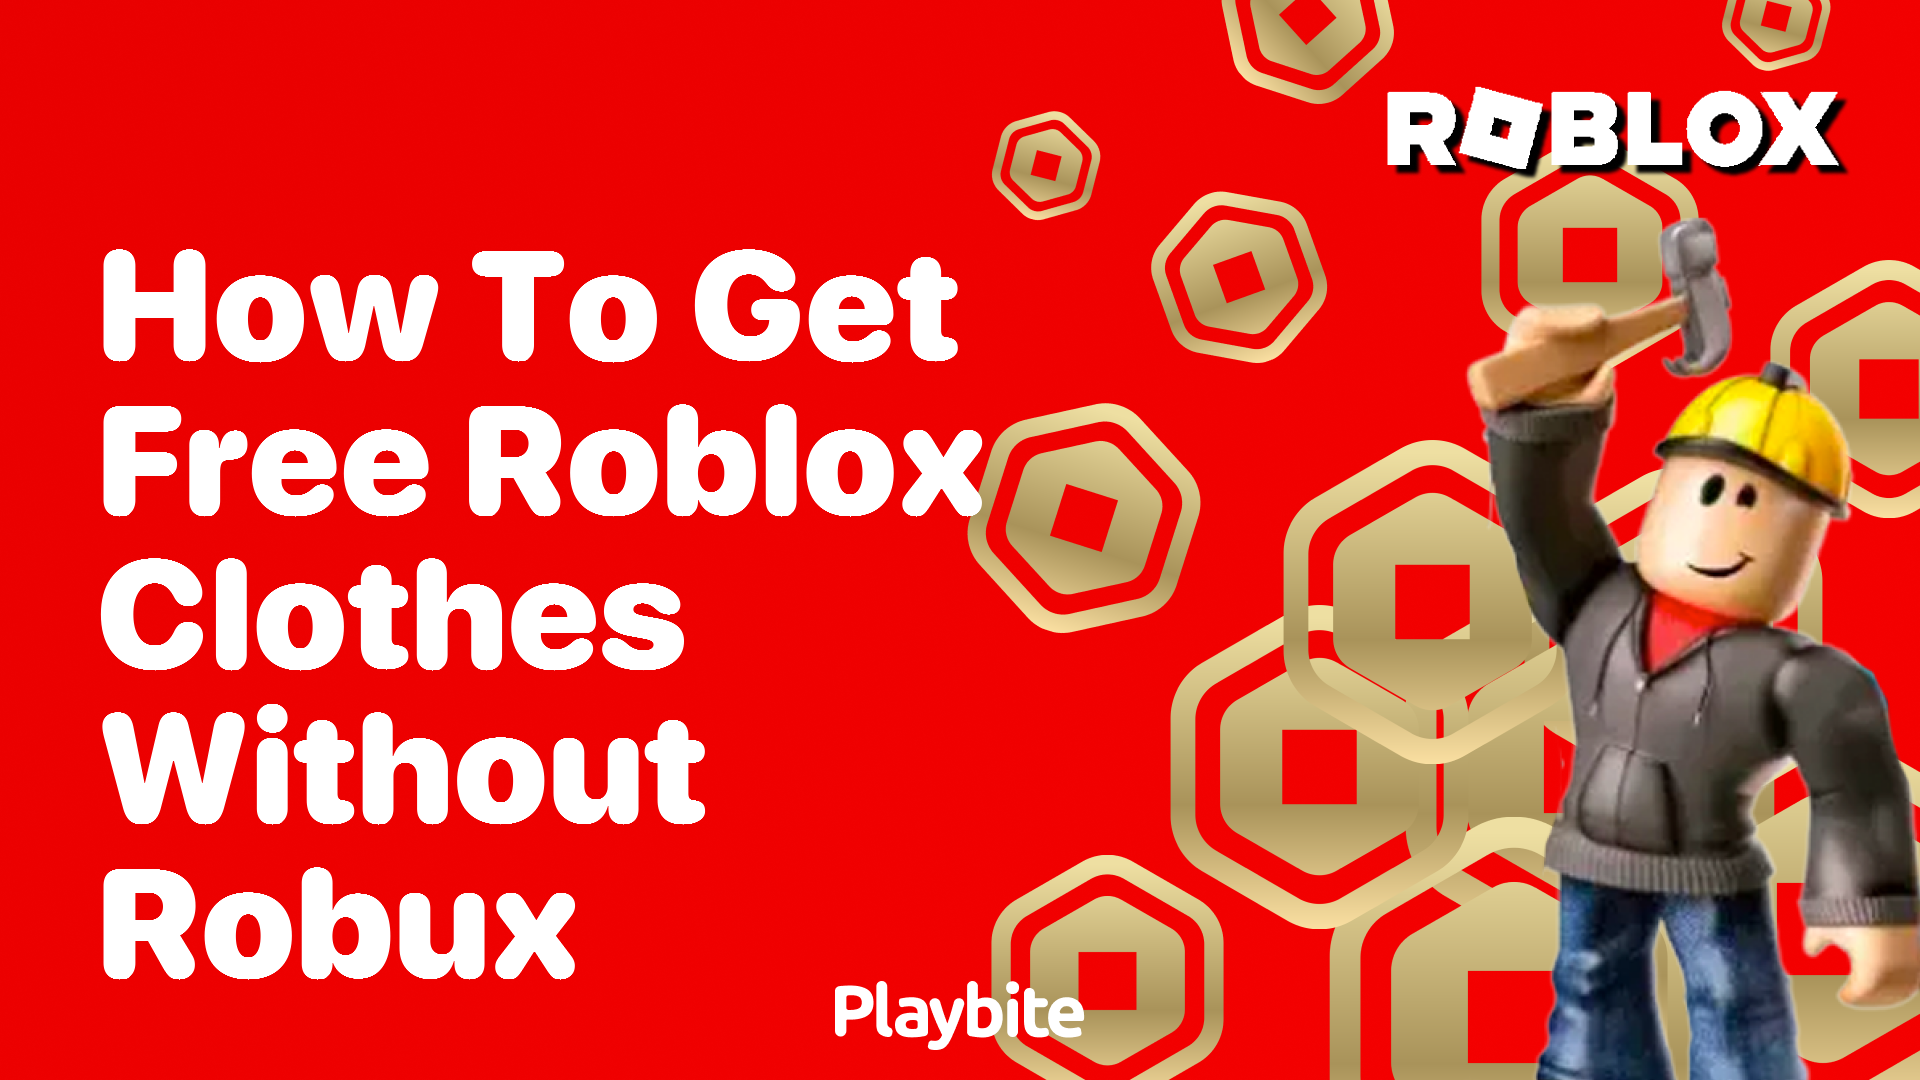 How to Get Free Roblox Clothes Without Robux